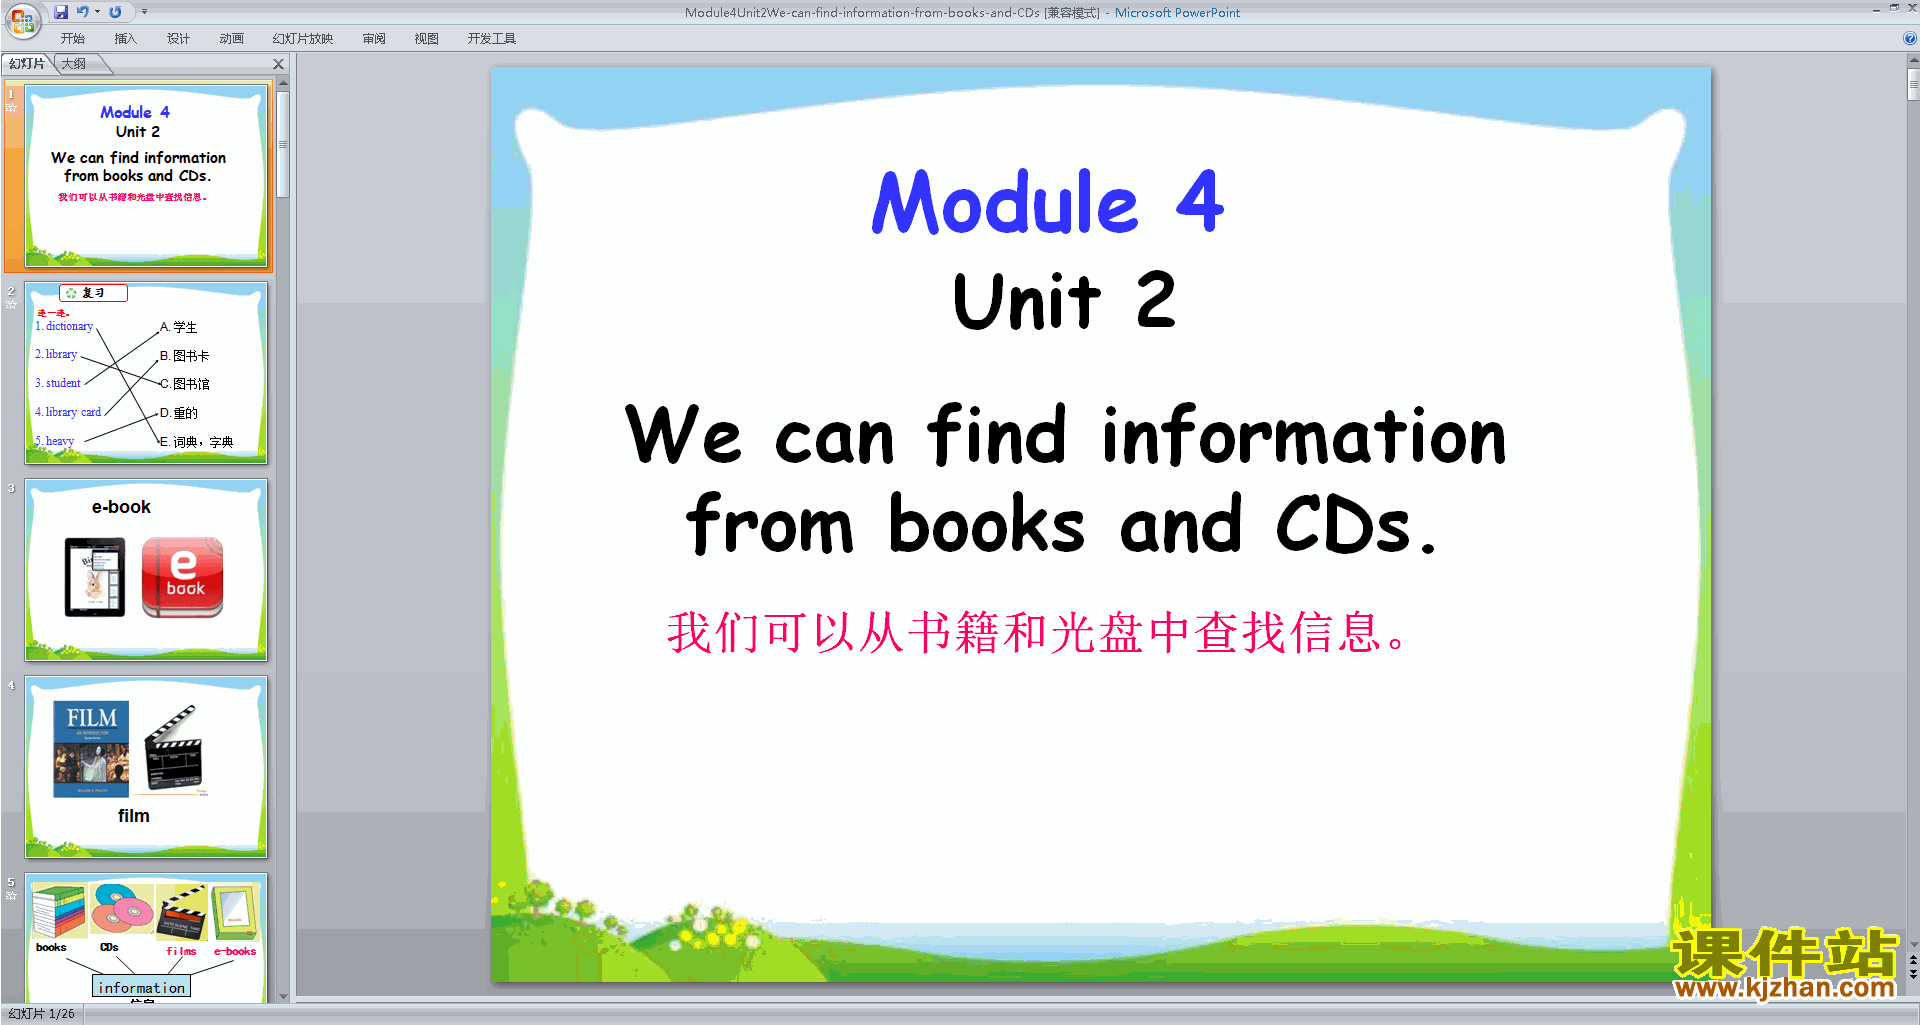 We can find information from books and CDs pptμ